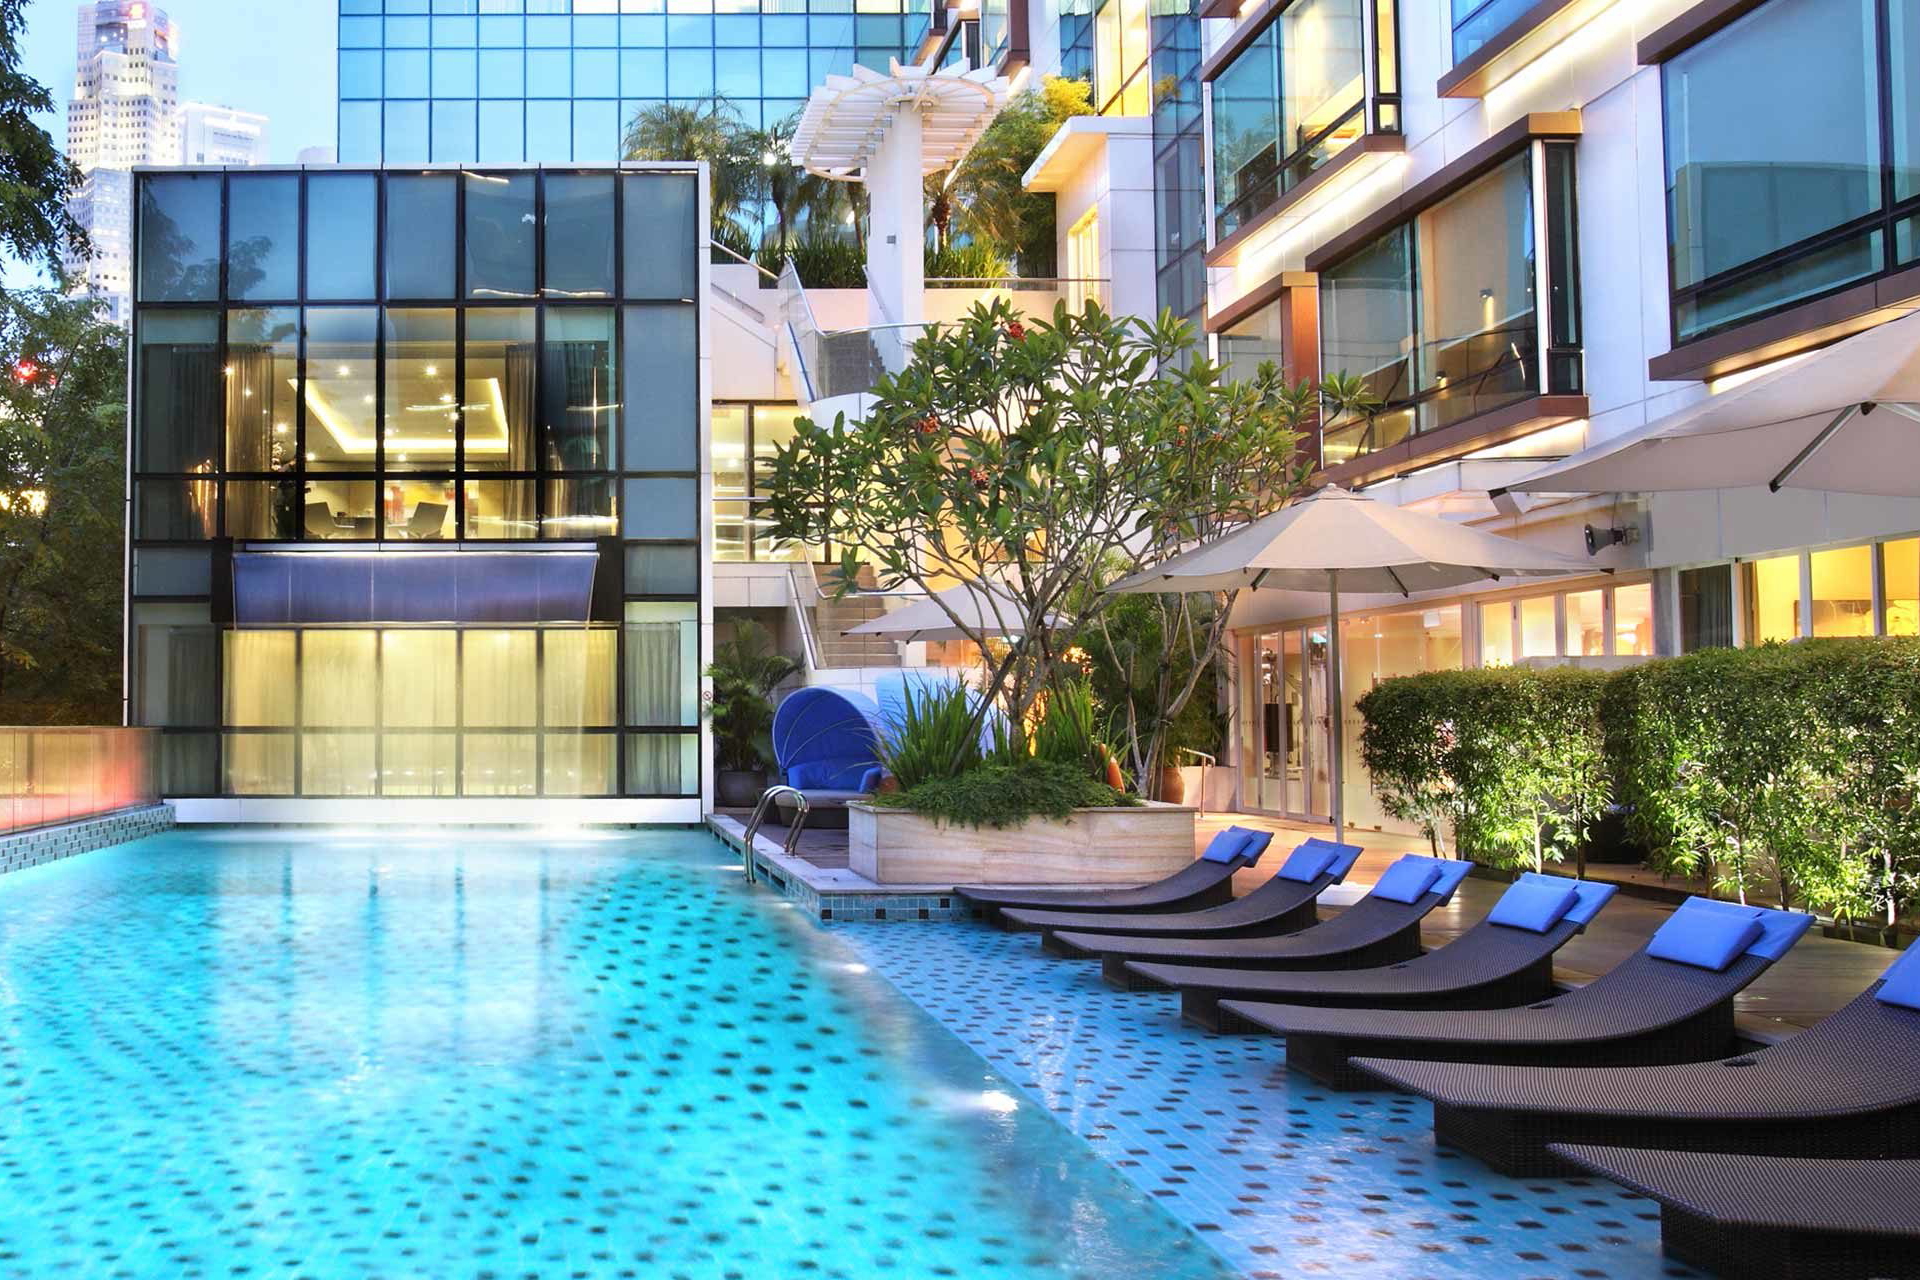 Swimming pool at the Park Regis Singapore. Click to enlarge.